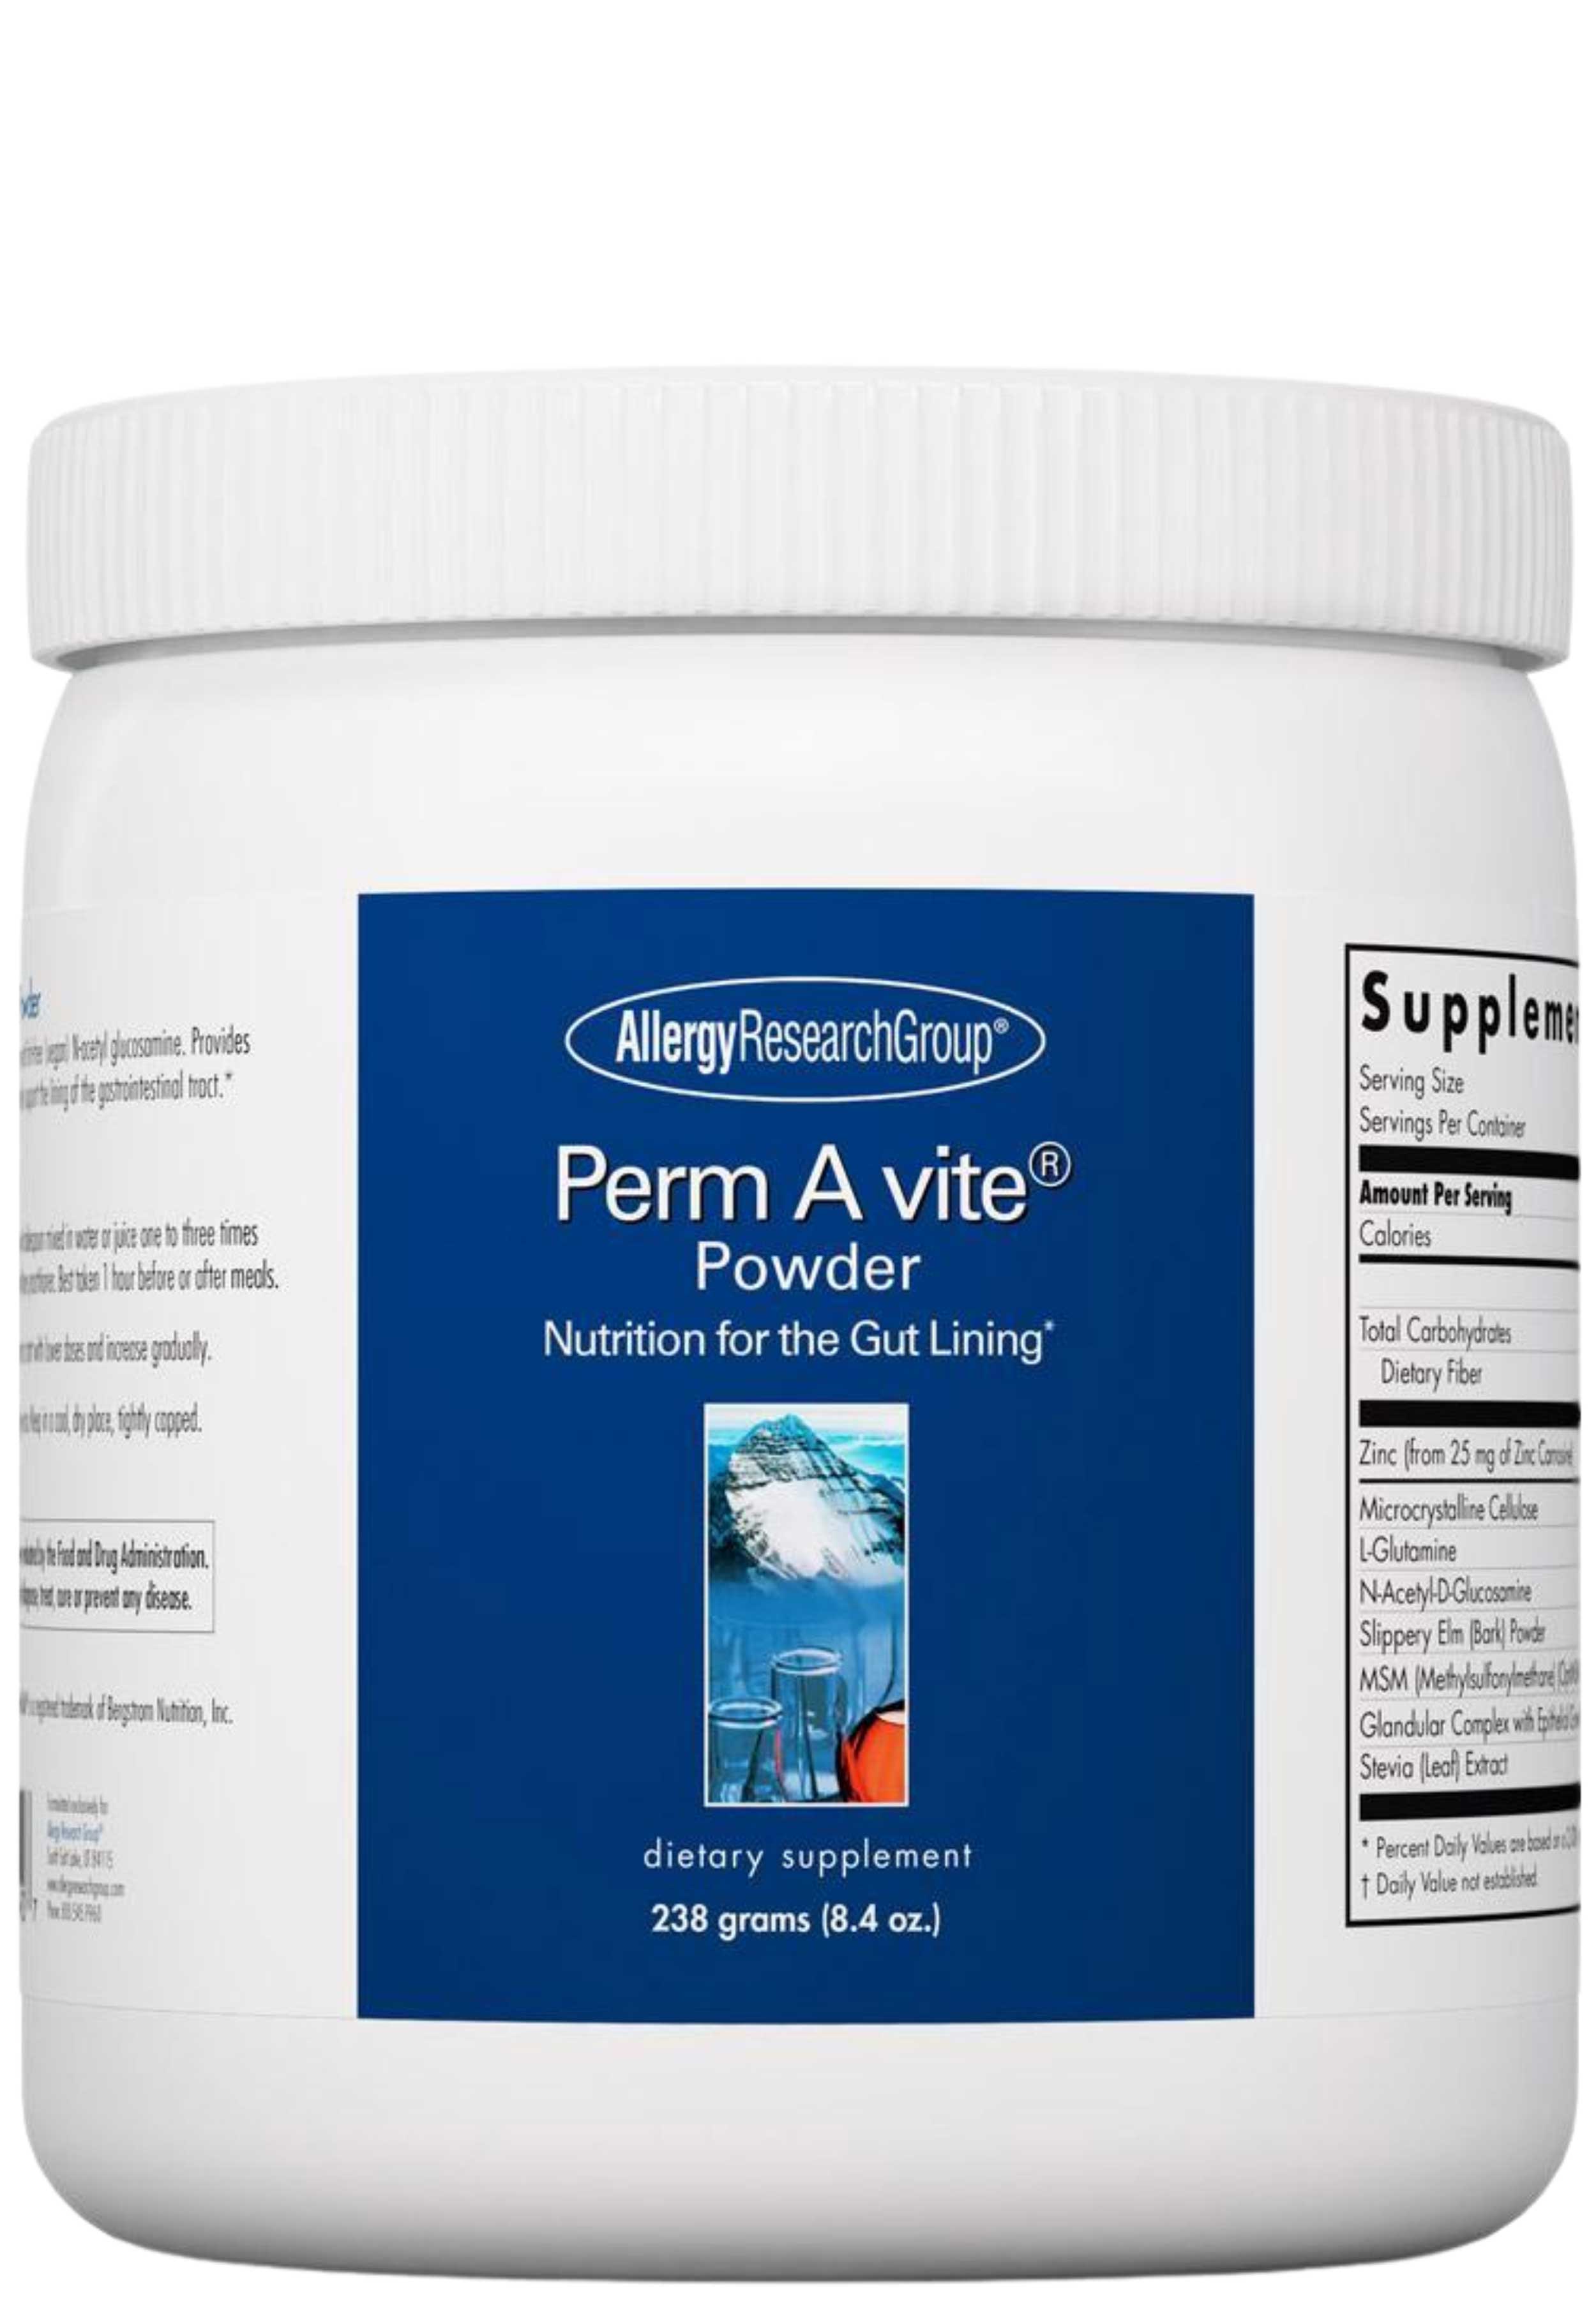 Allergy Research Group Perm A vite Powder